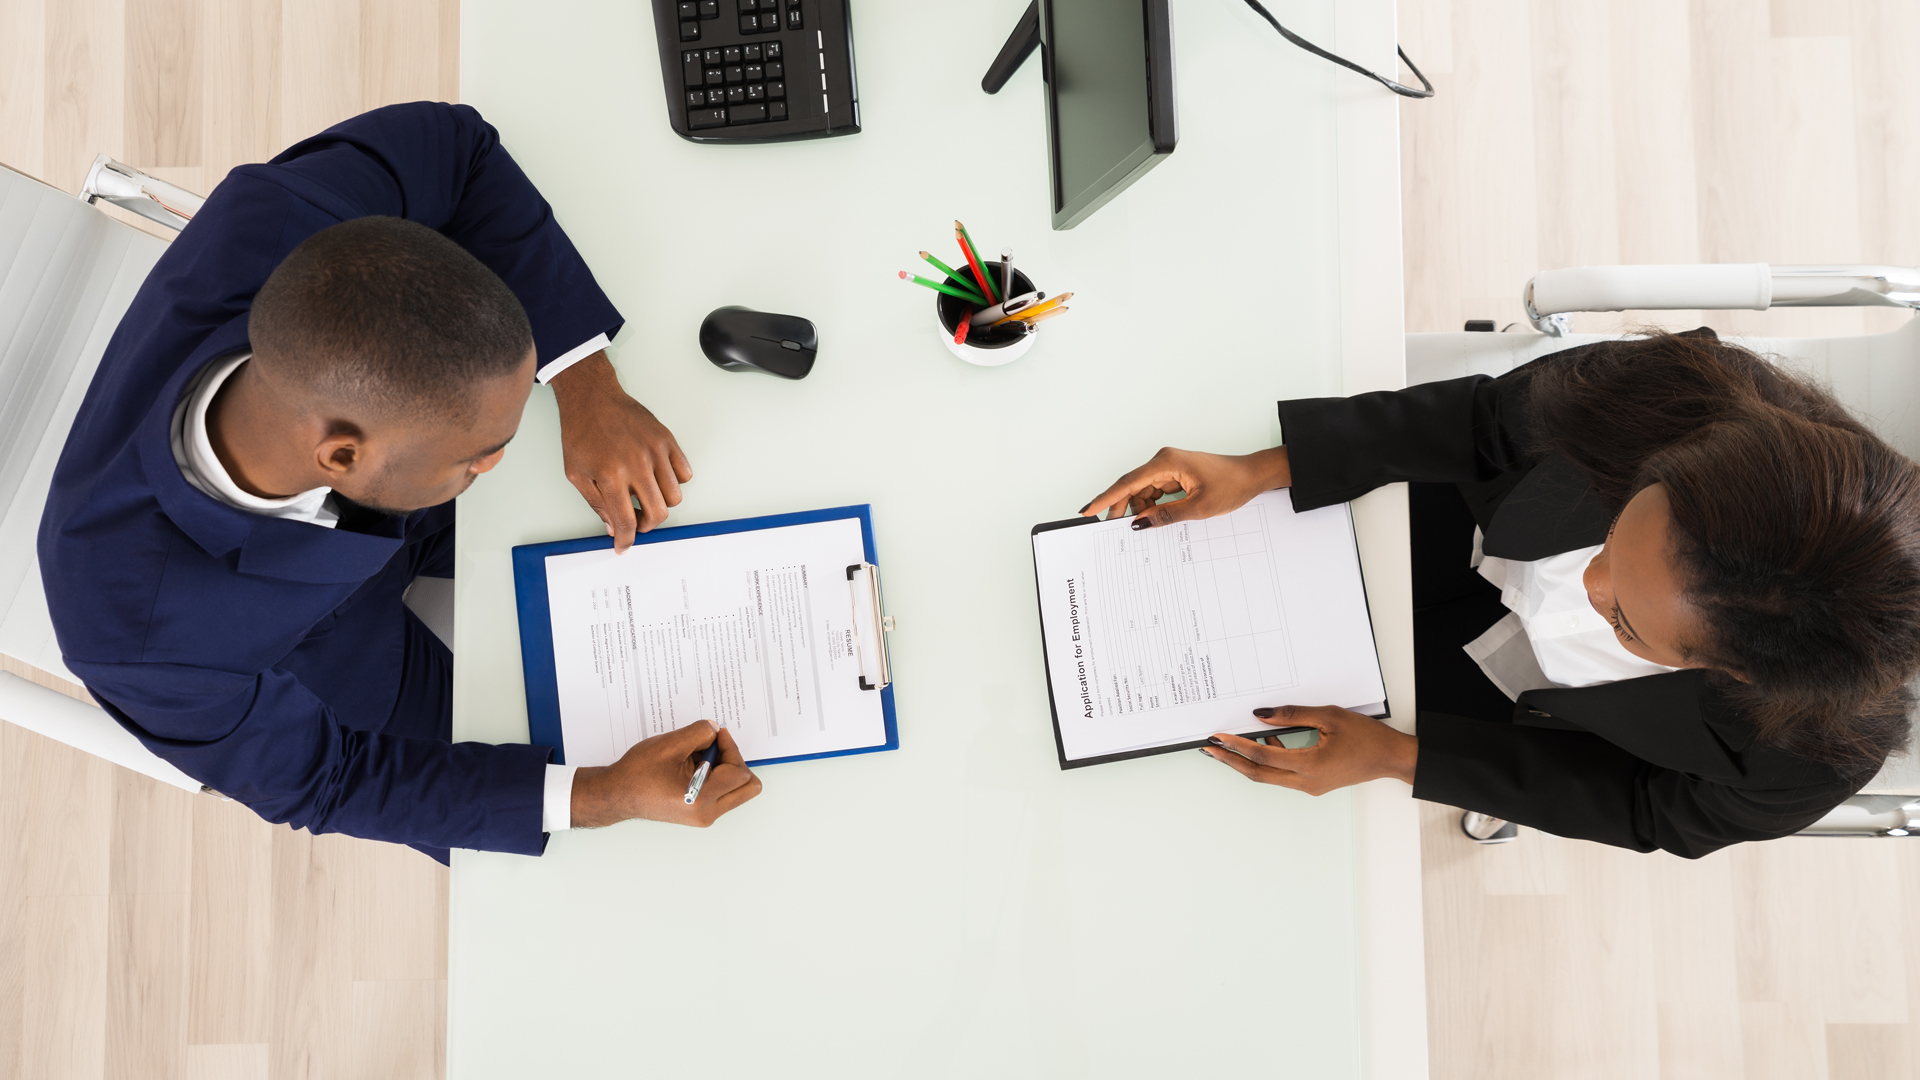 top-down view of two people seated at table discussing resume and job application